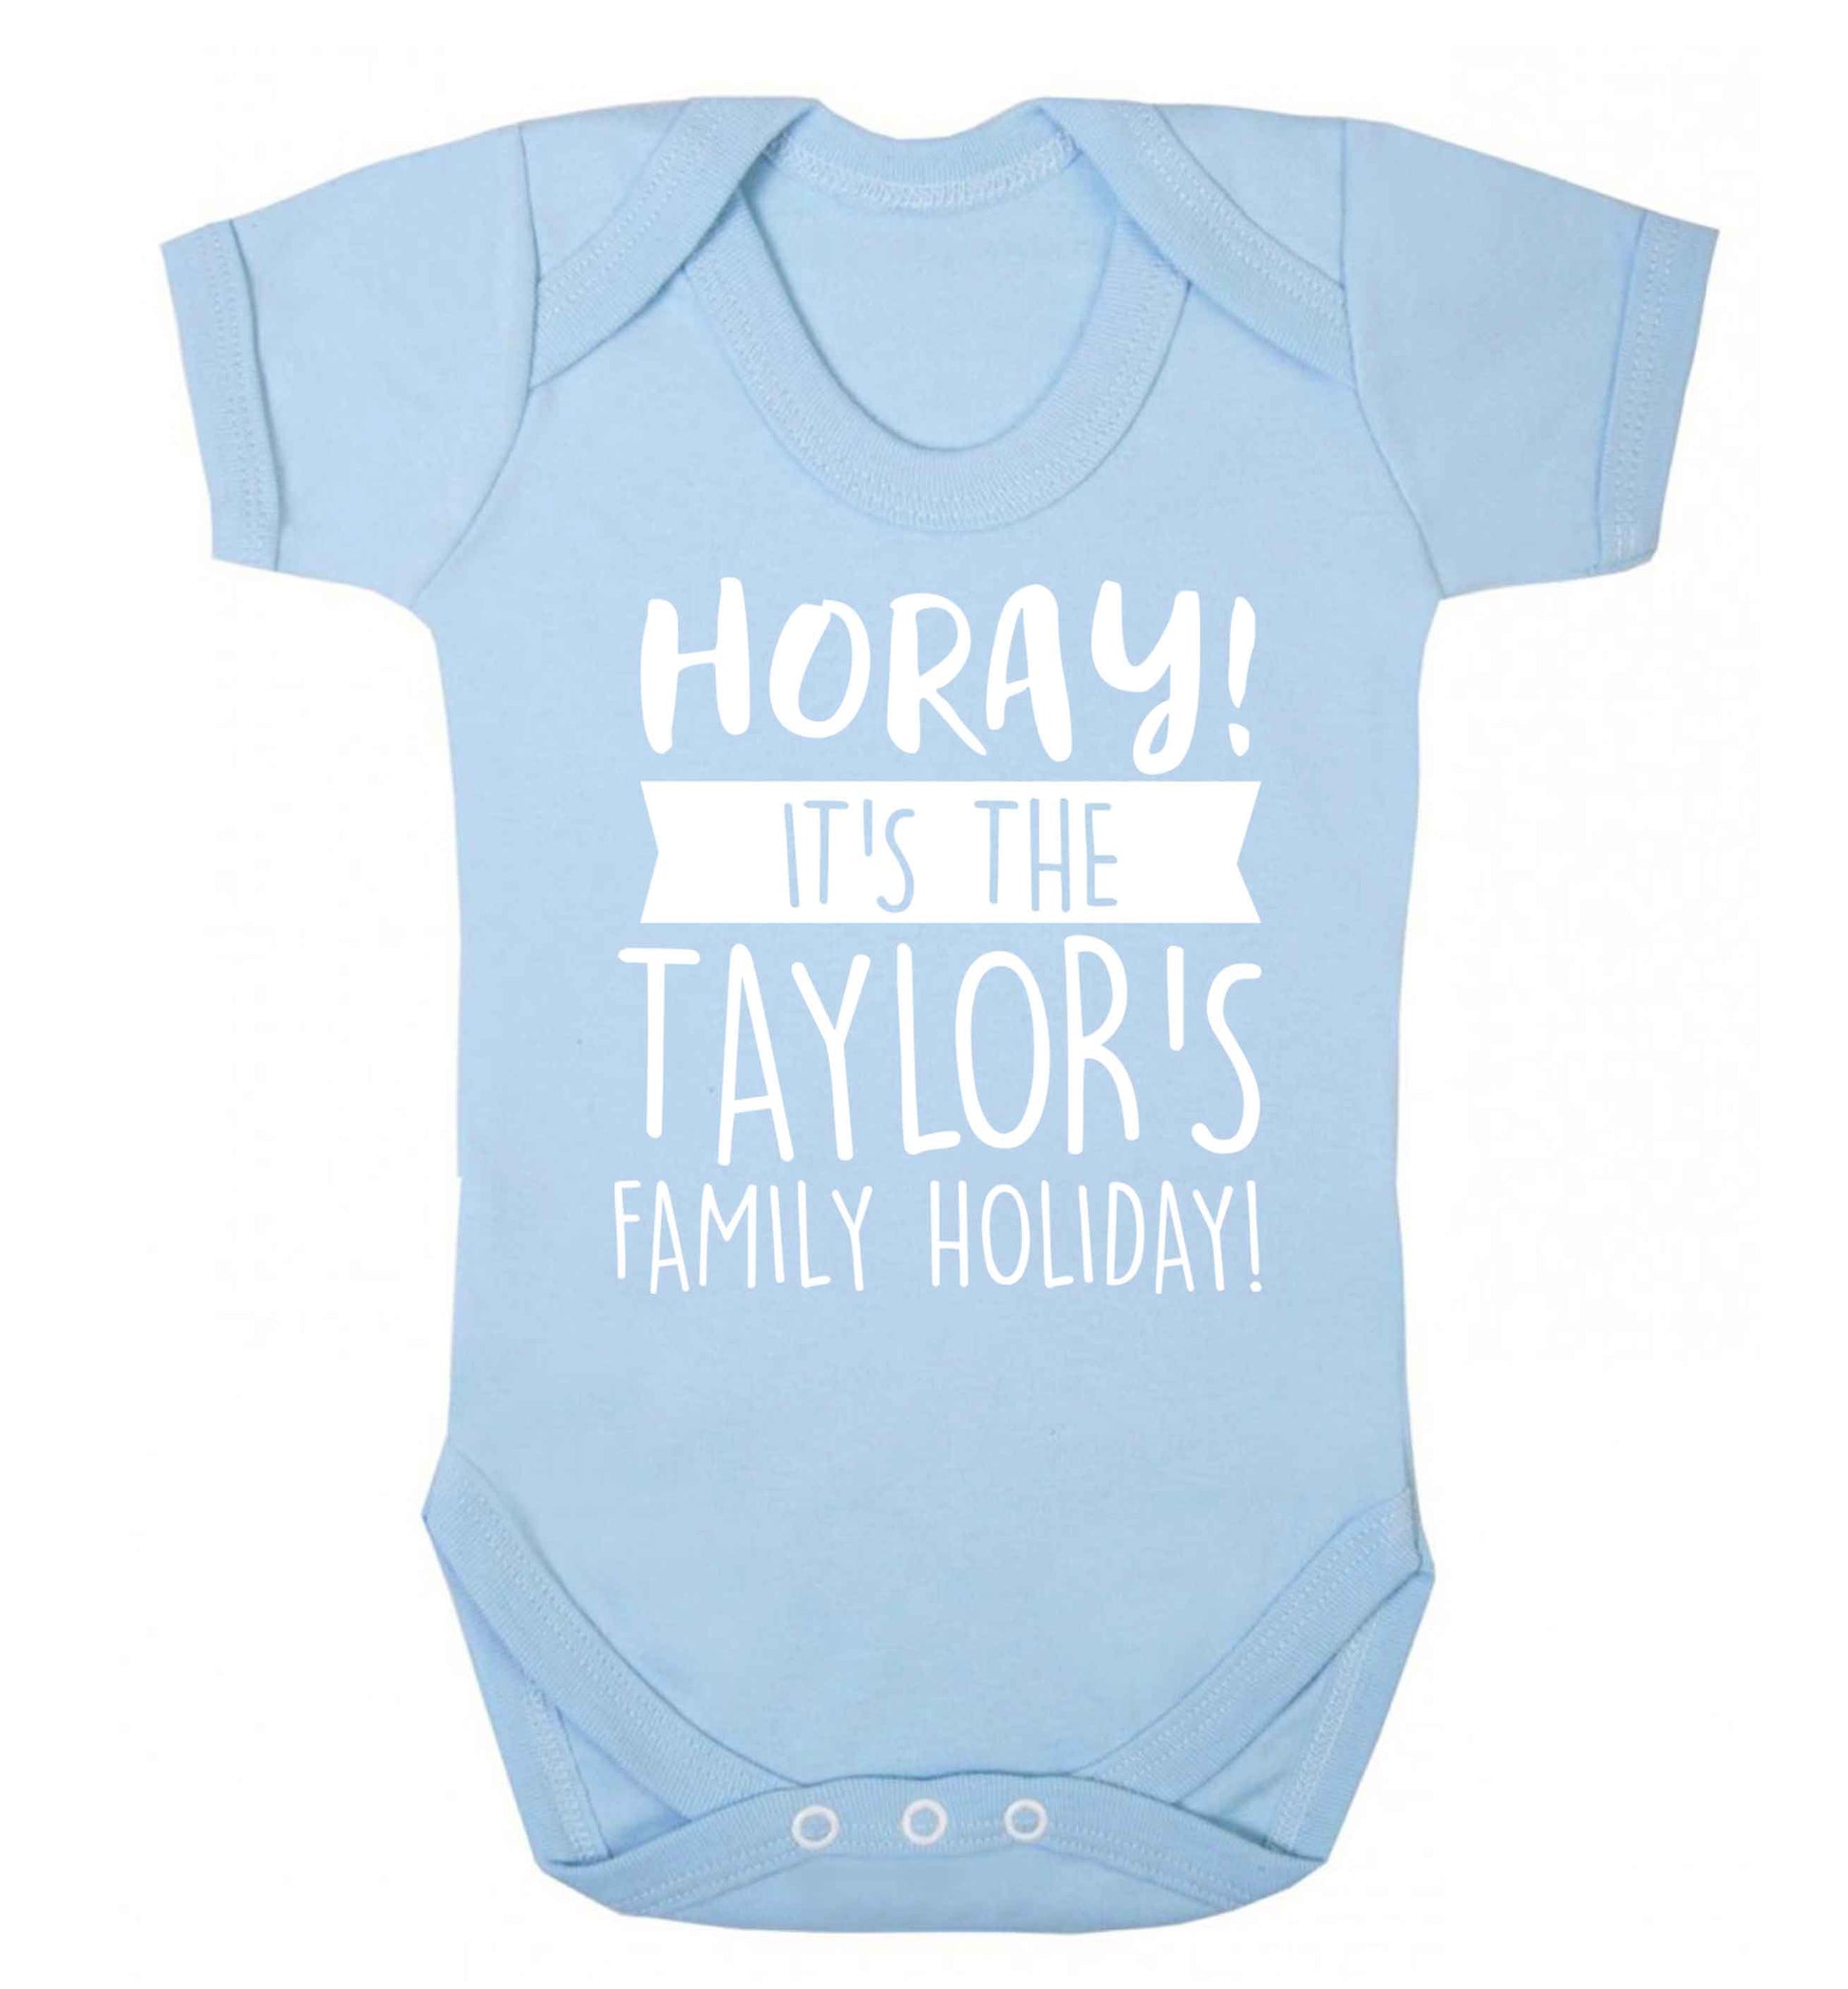 Horay it's the Taylor's family holiday! personalised item Baby Vest pale blue 18-24 months